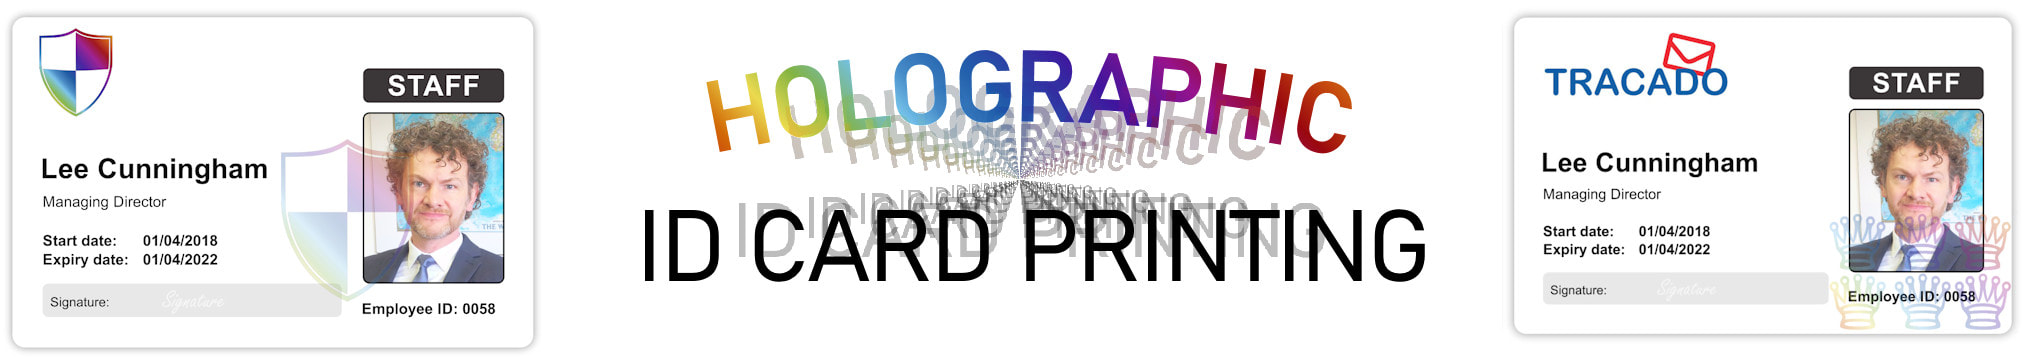 Bury holographic staff ID card print service. Employee Identity cards with hologram or holograph security mark. Staff, workers, corporate!